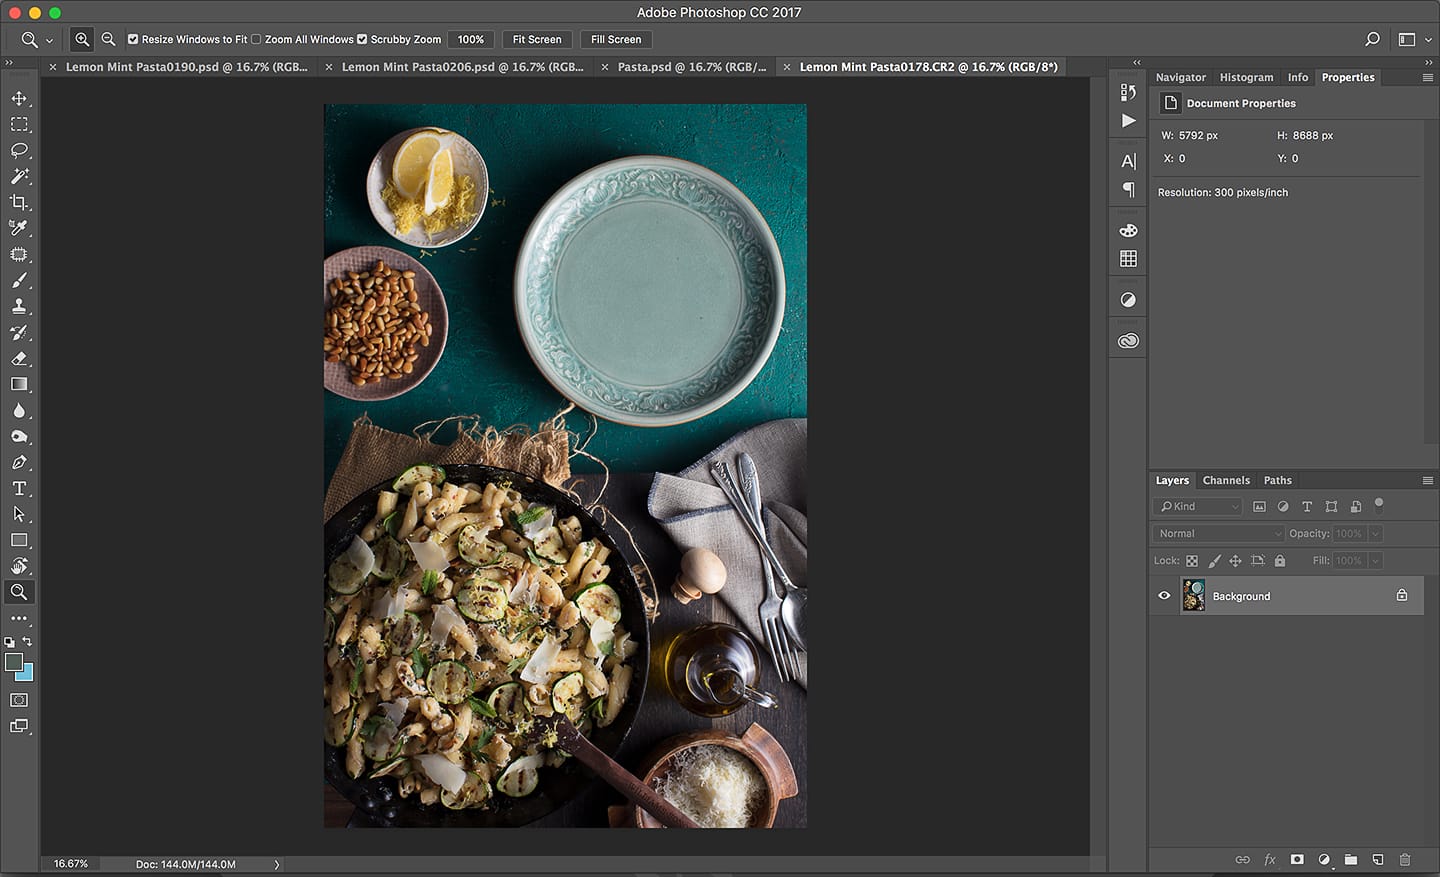 Not Enough Food? 4 Simple Photoshop Steps To Composite Food Photography - WeEatTogether.com